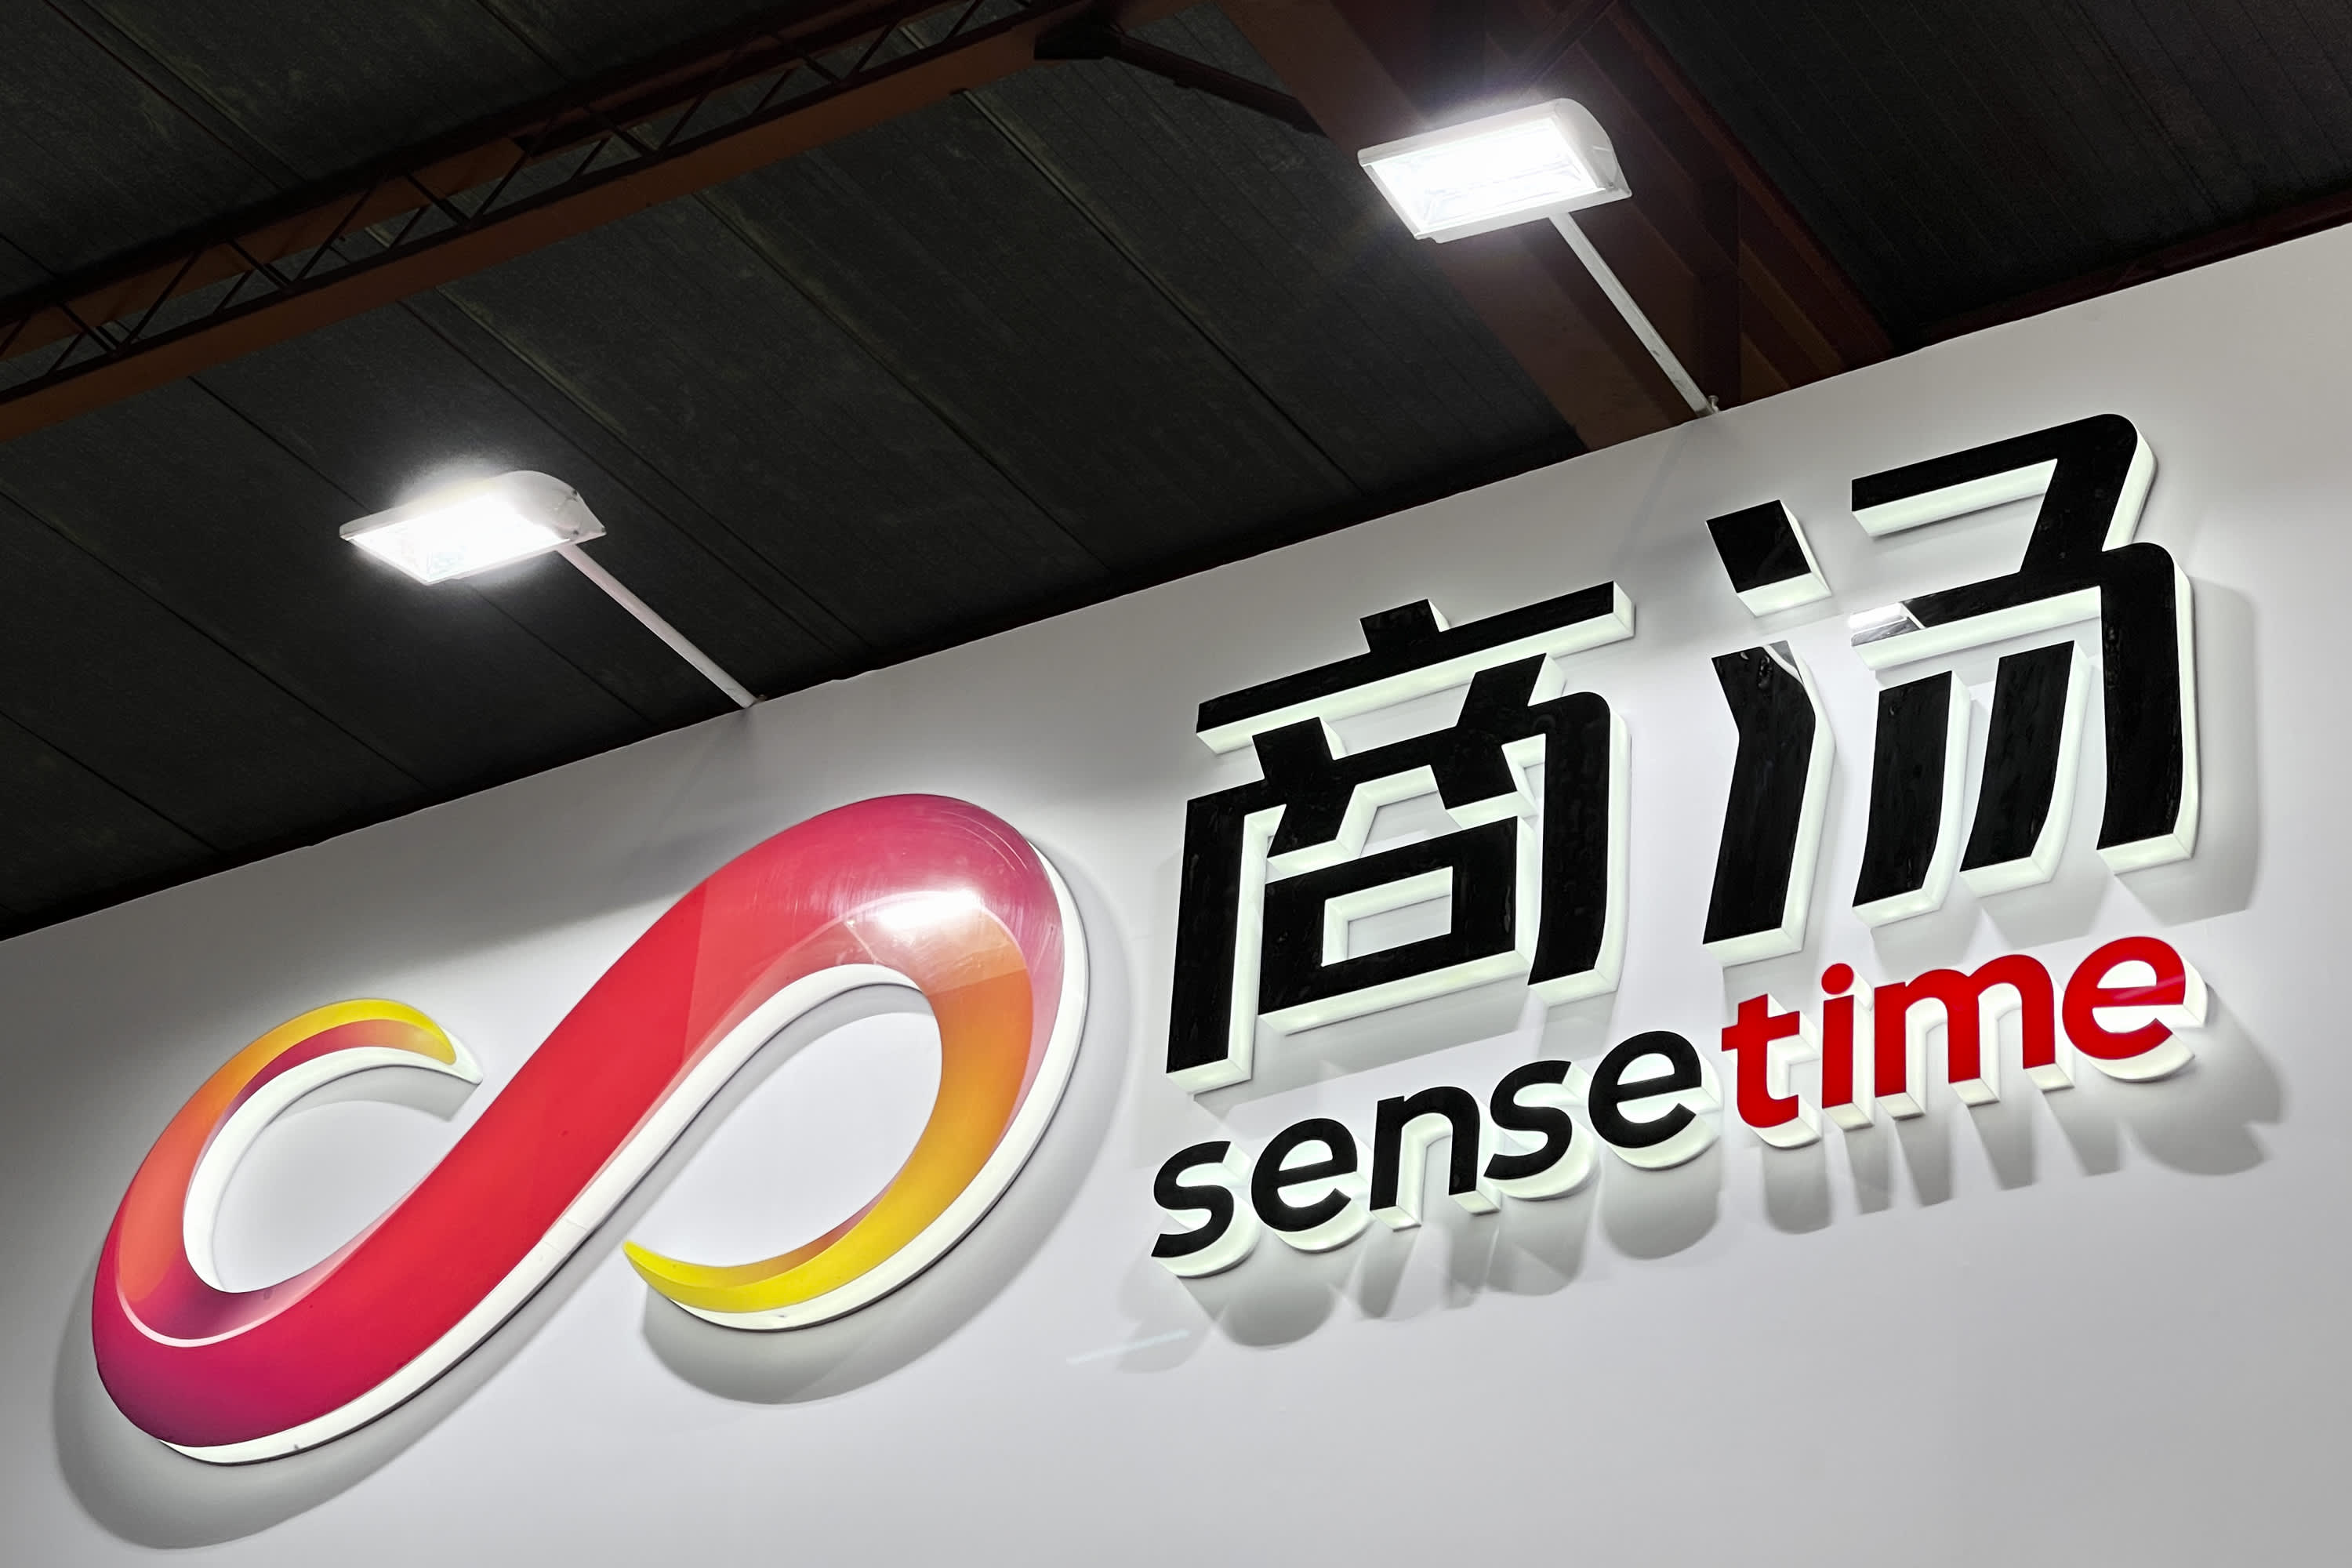 Shares of Chinese AI giant SenseTime fall to historic low after founder's death